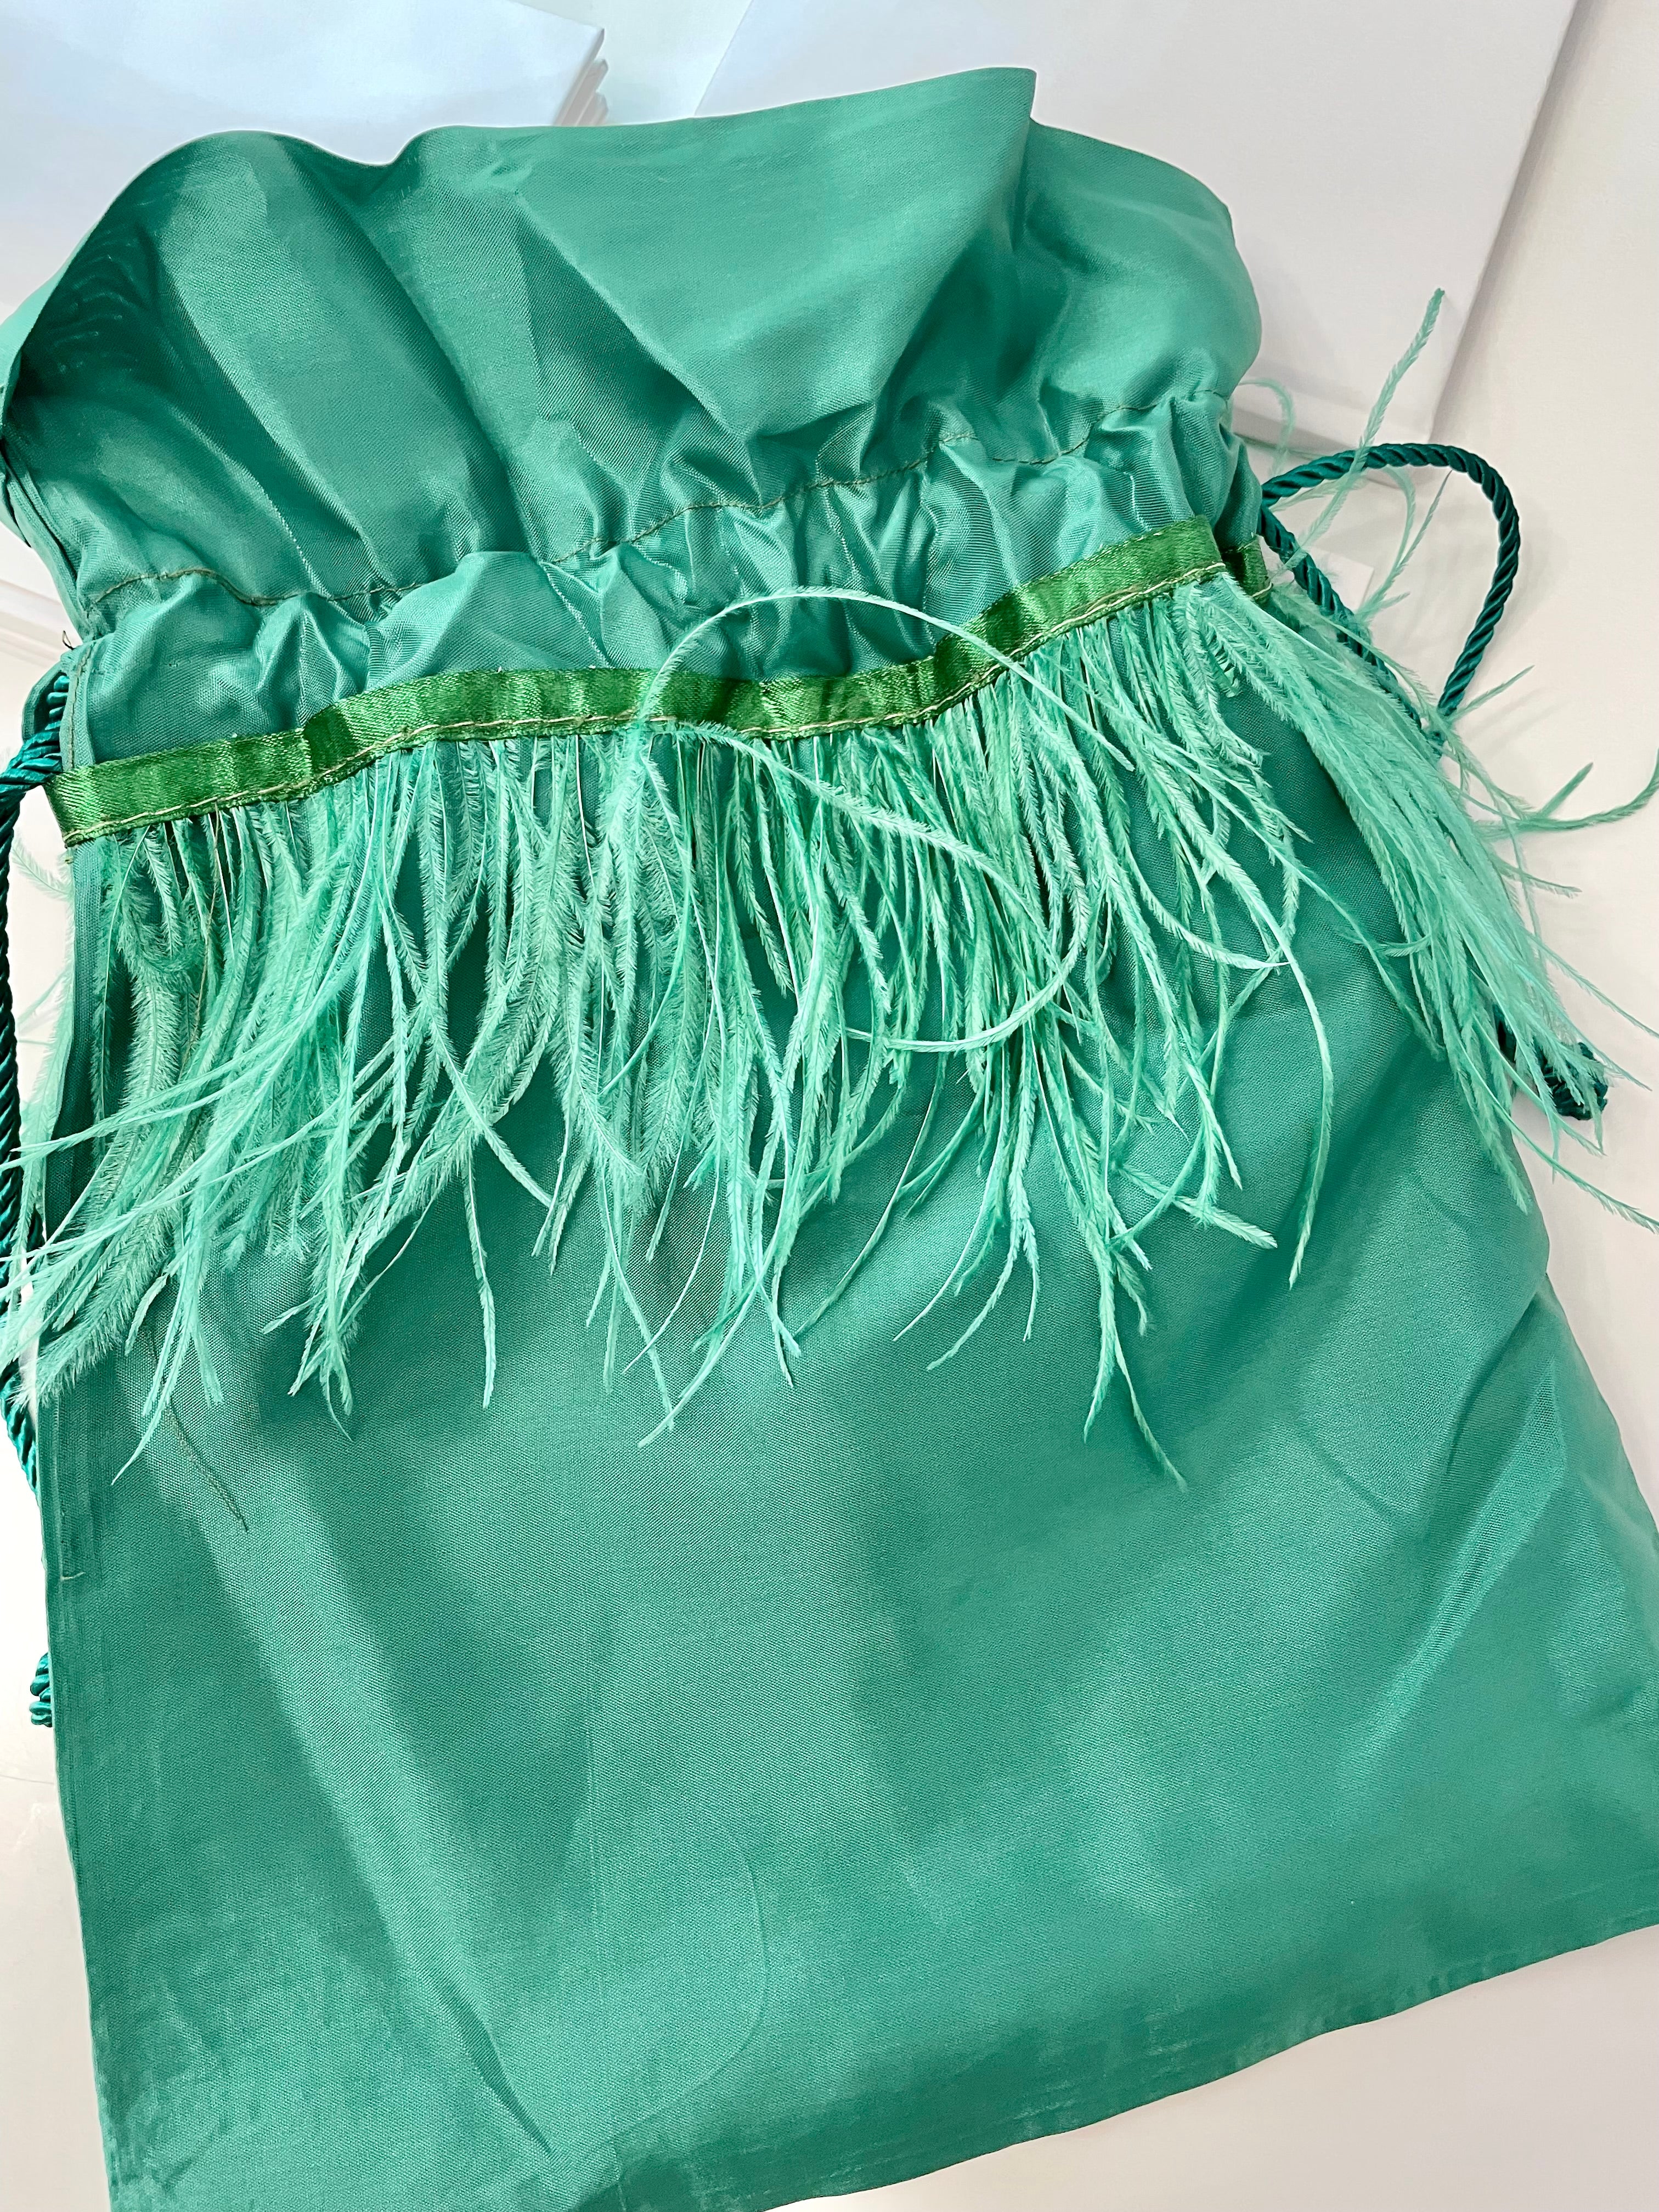 Vintage Italian emerald satin bag, adorned with ostrich feathers...so elegant!